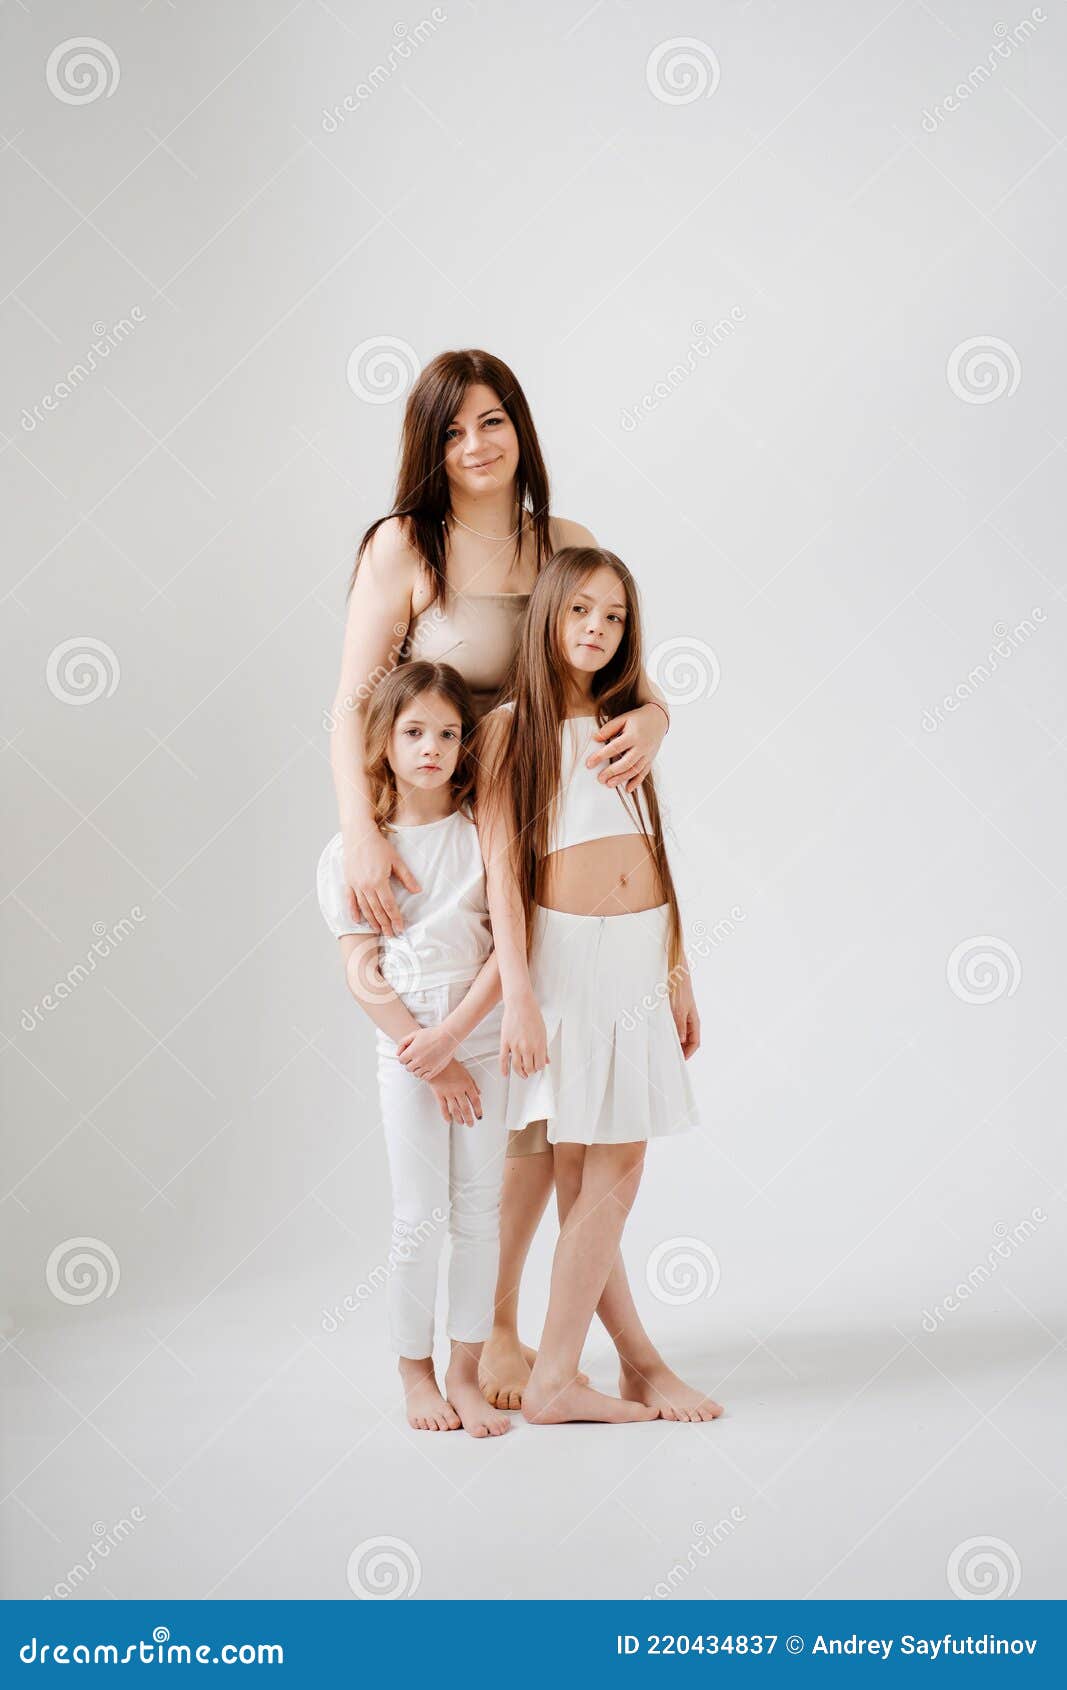 Indoor Portrait Of A Beautiful Mother With Her Charming Little Daughter  Posing Against Bedroom Interior. Stock Photo, Picture and Royalty Free  Image. Image 128585994.